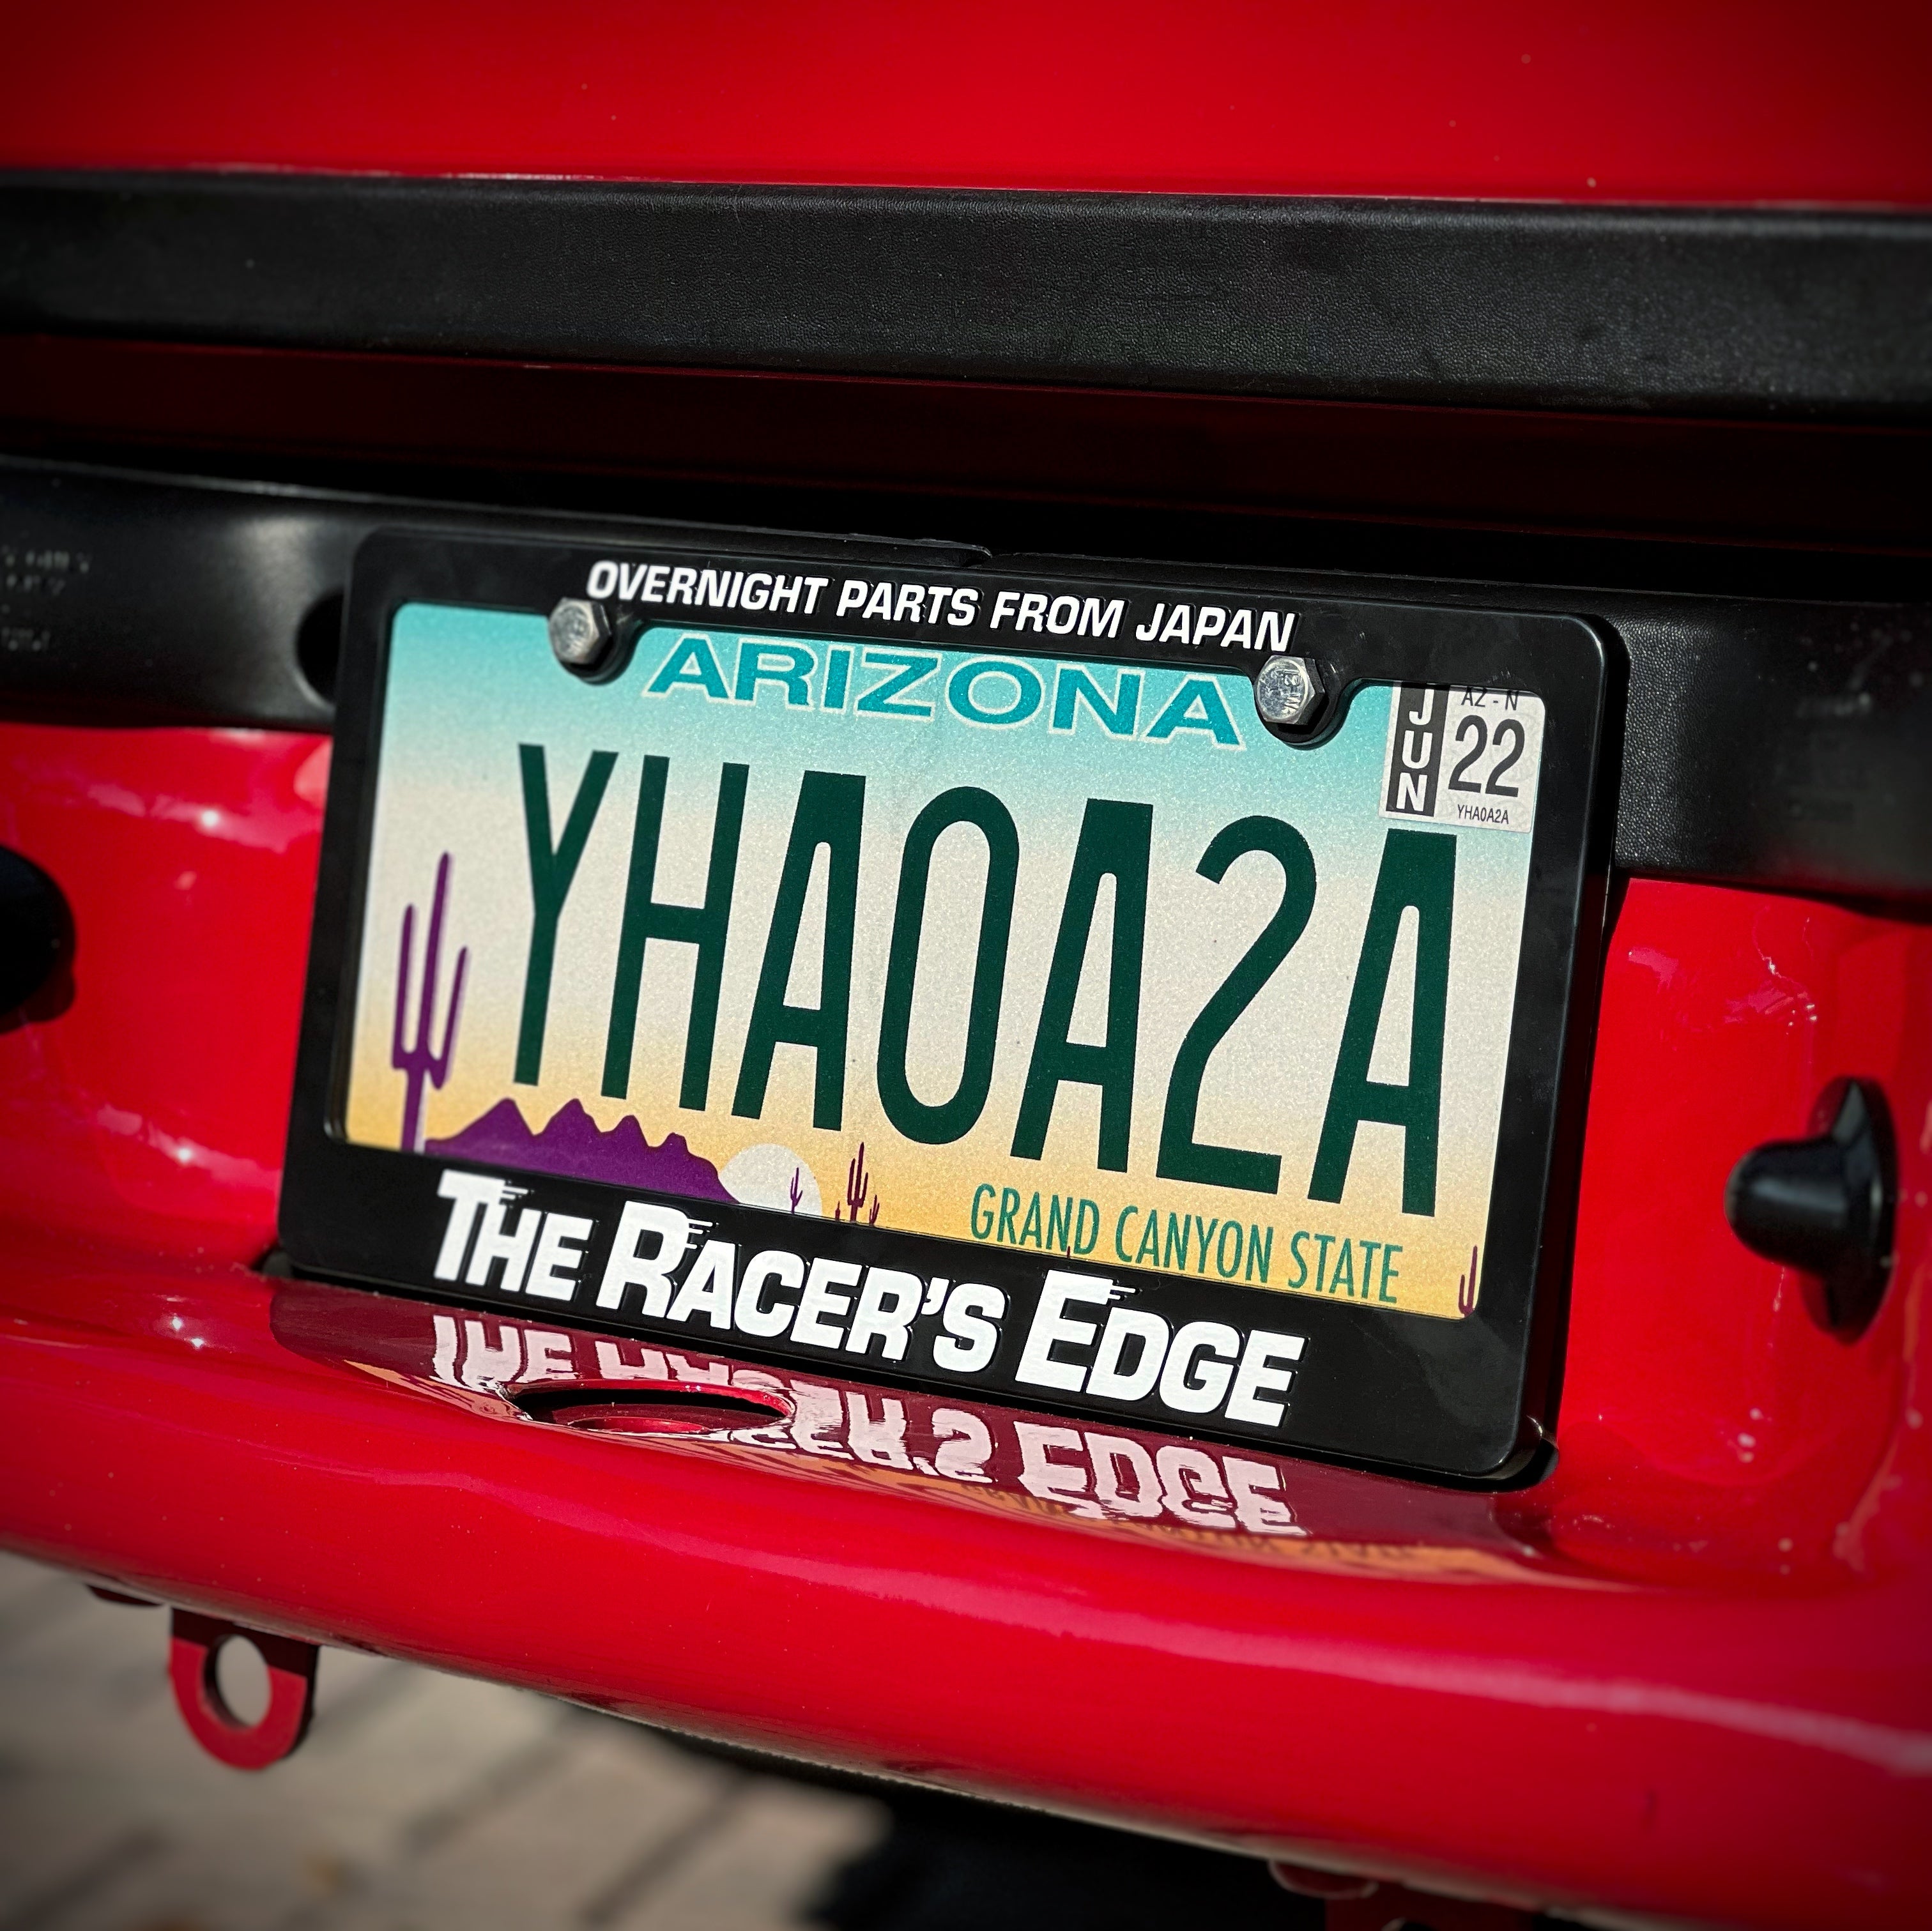 Racers Edge “Overnight Parts from Japan” License Plate Frame